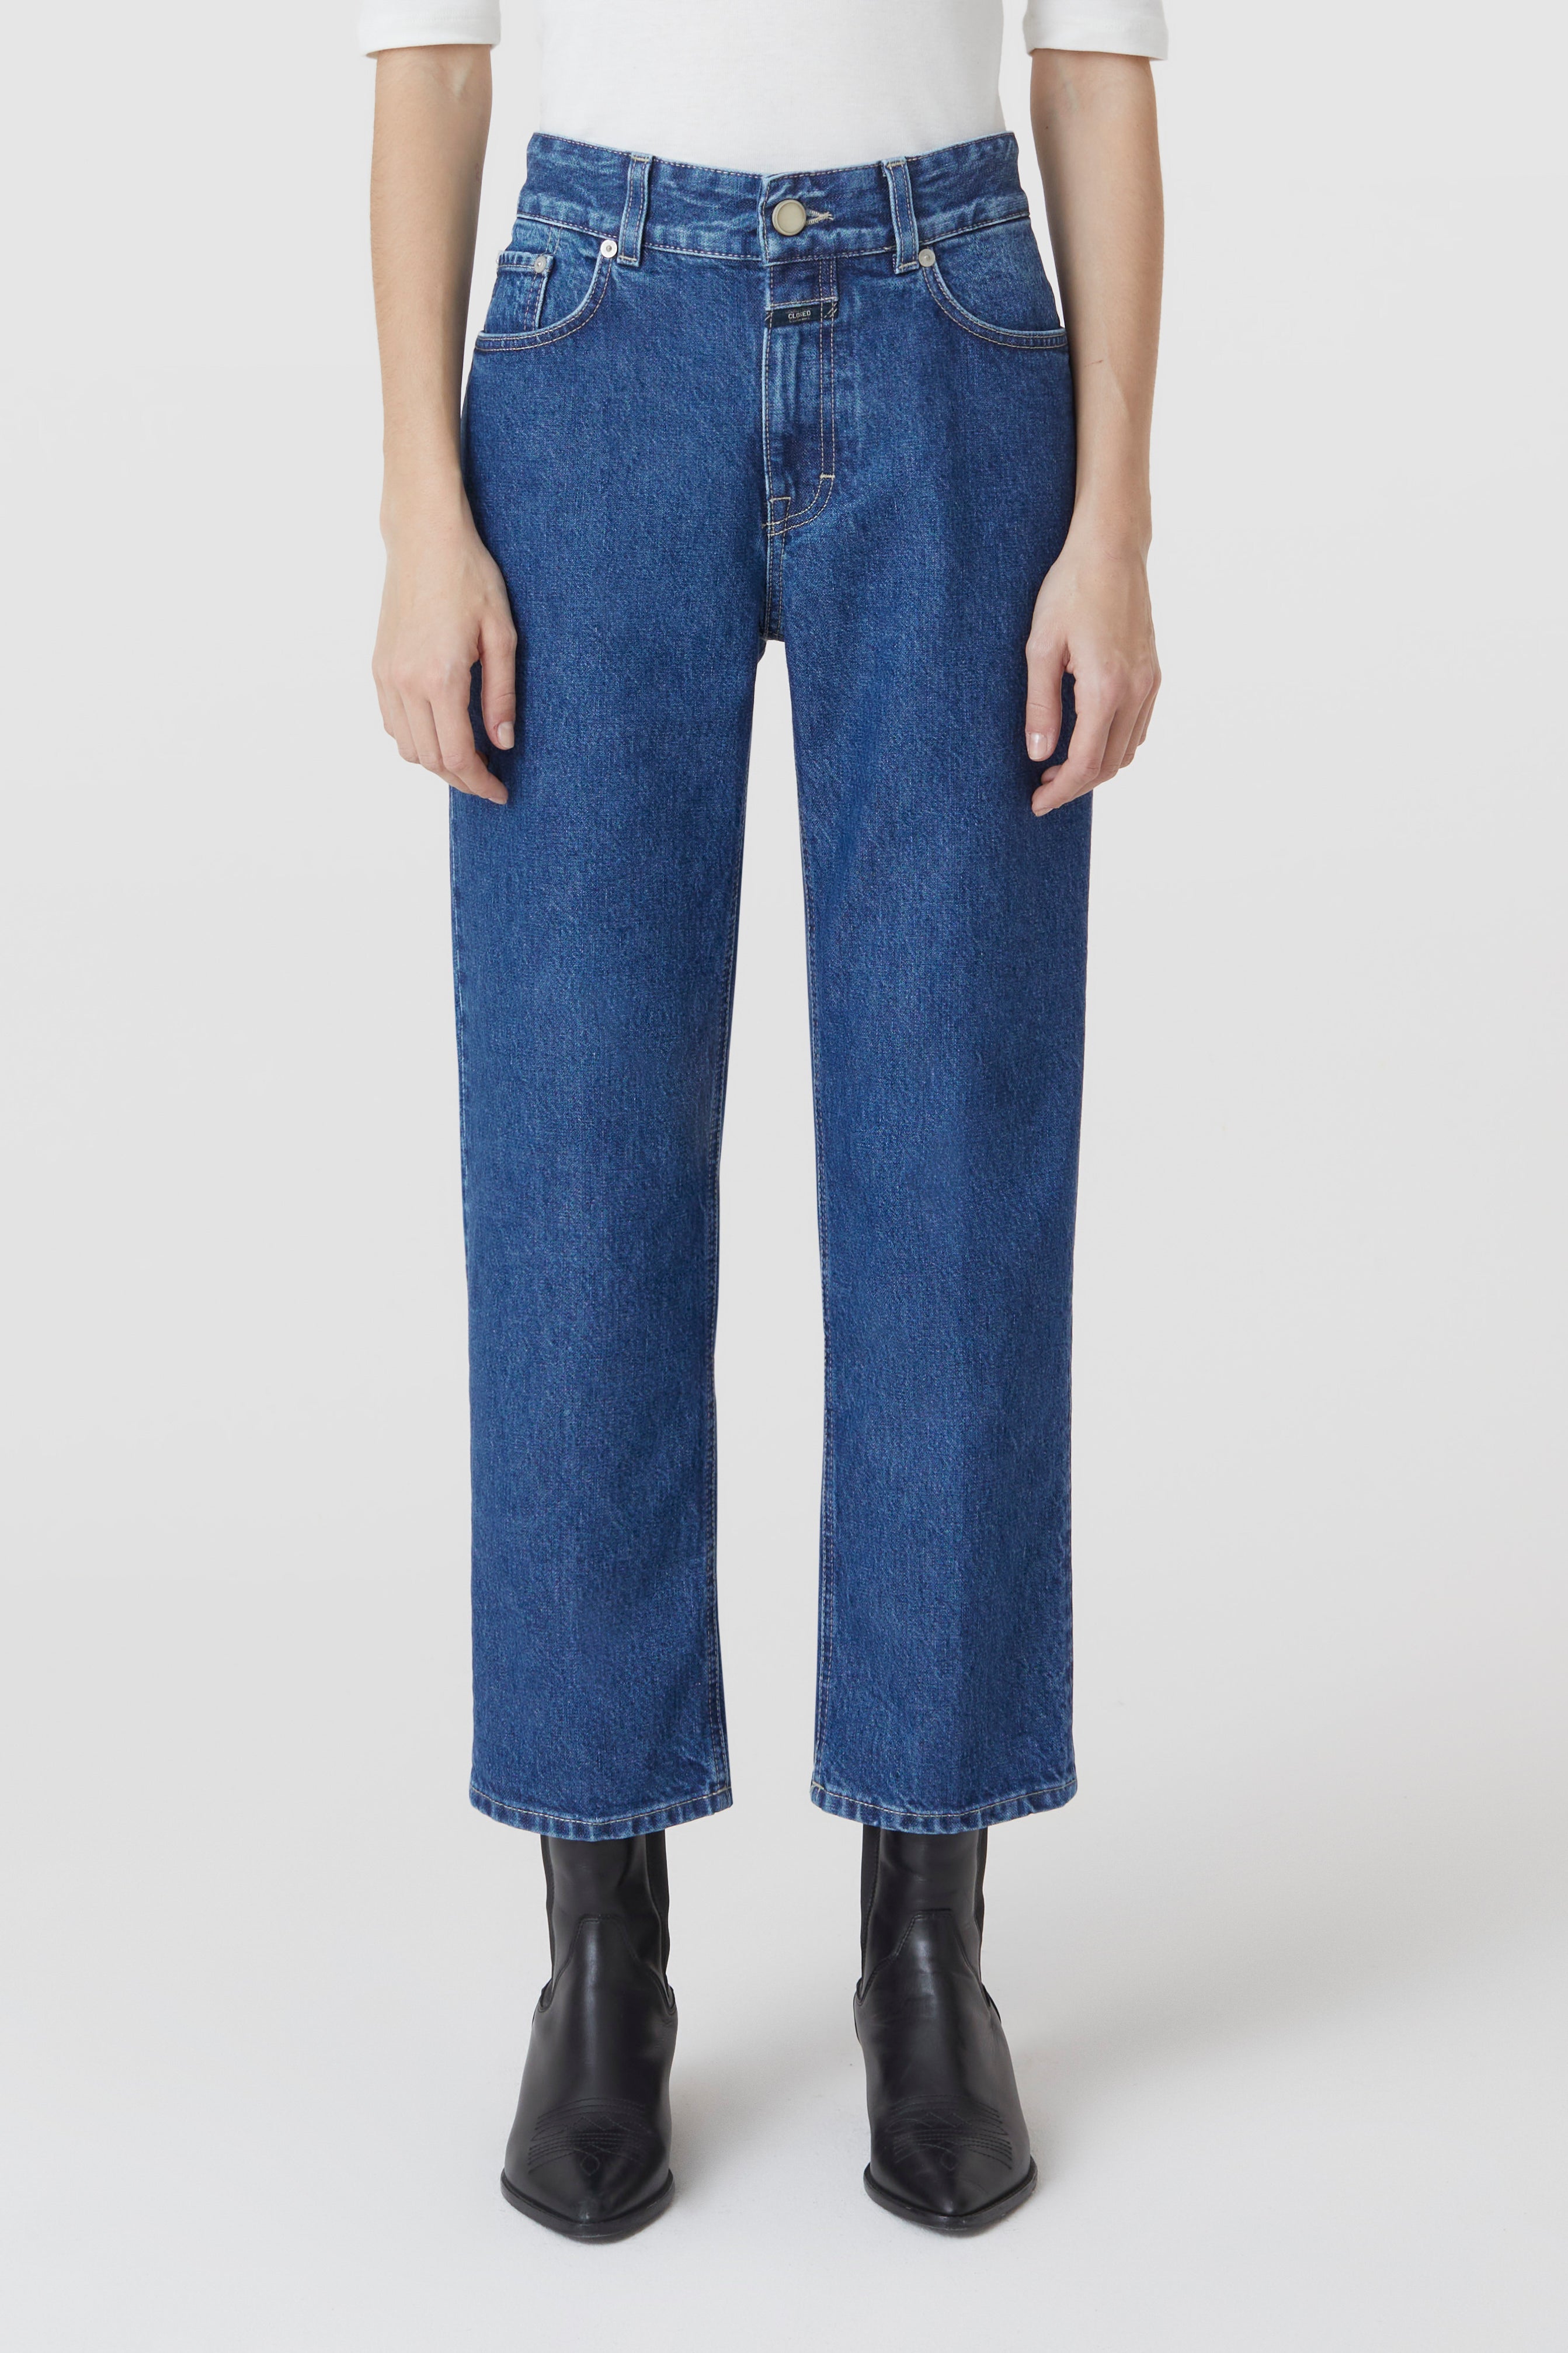 CLOSED-OUTLET-SALE-STYLE-NAME-MILO-JEANS-Jeans-ARCHIVE-COLLECTION.jpg